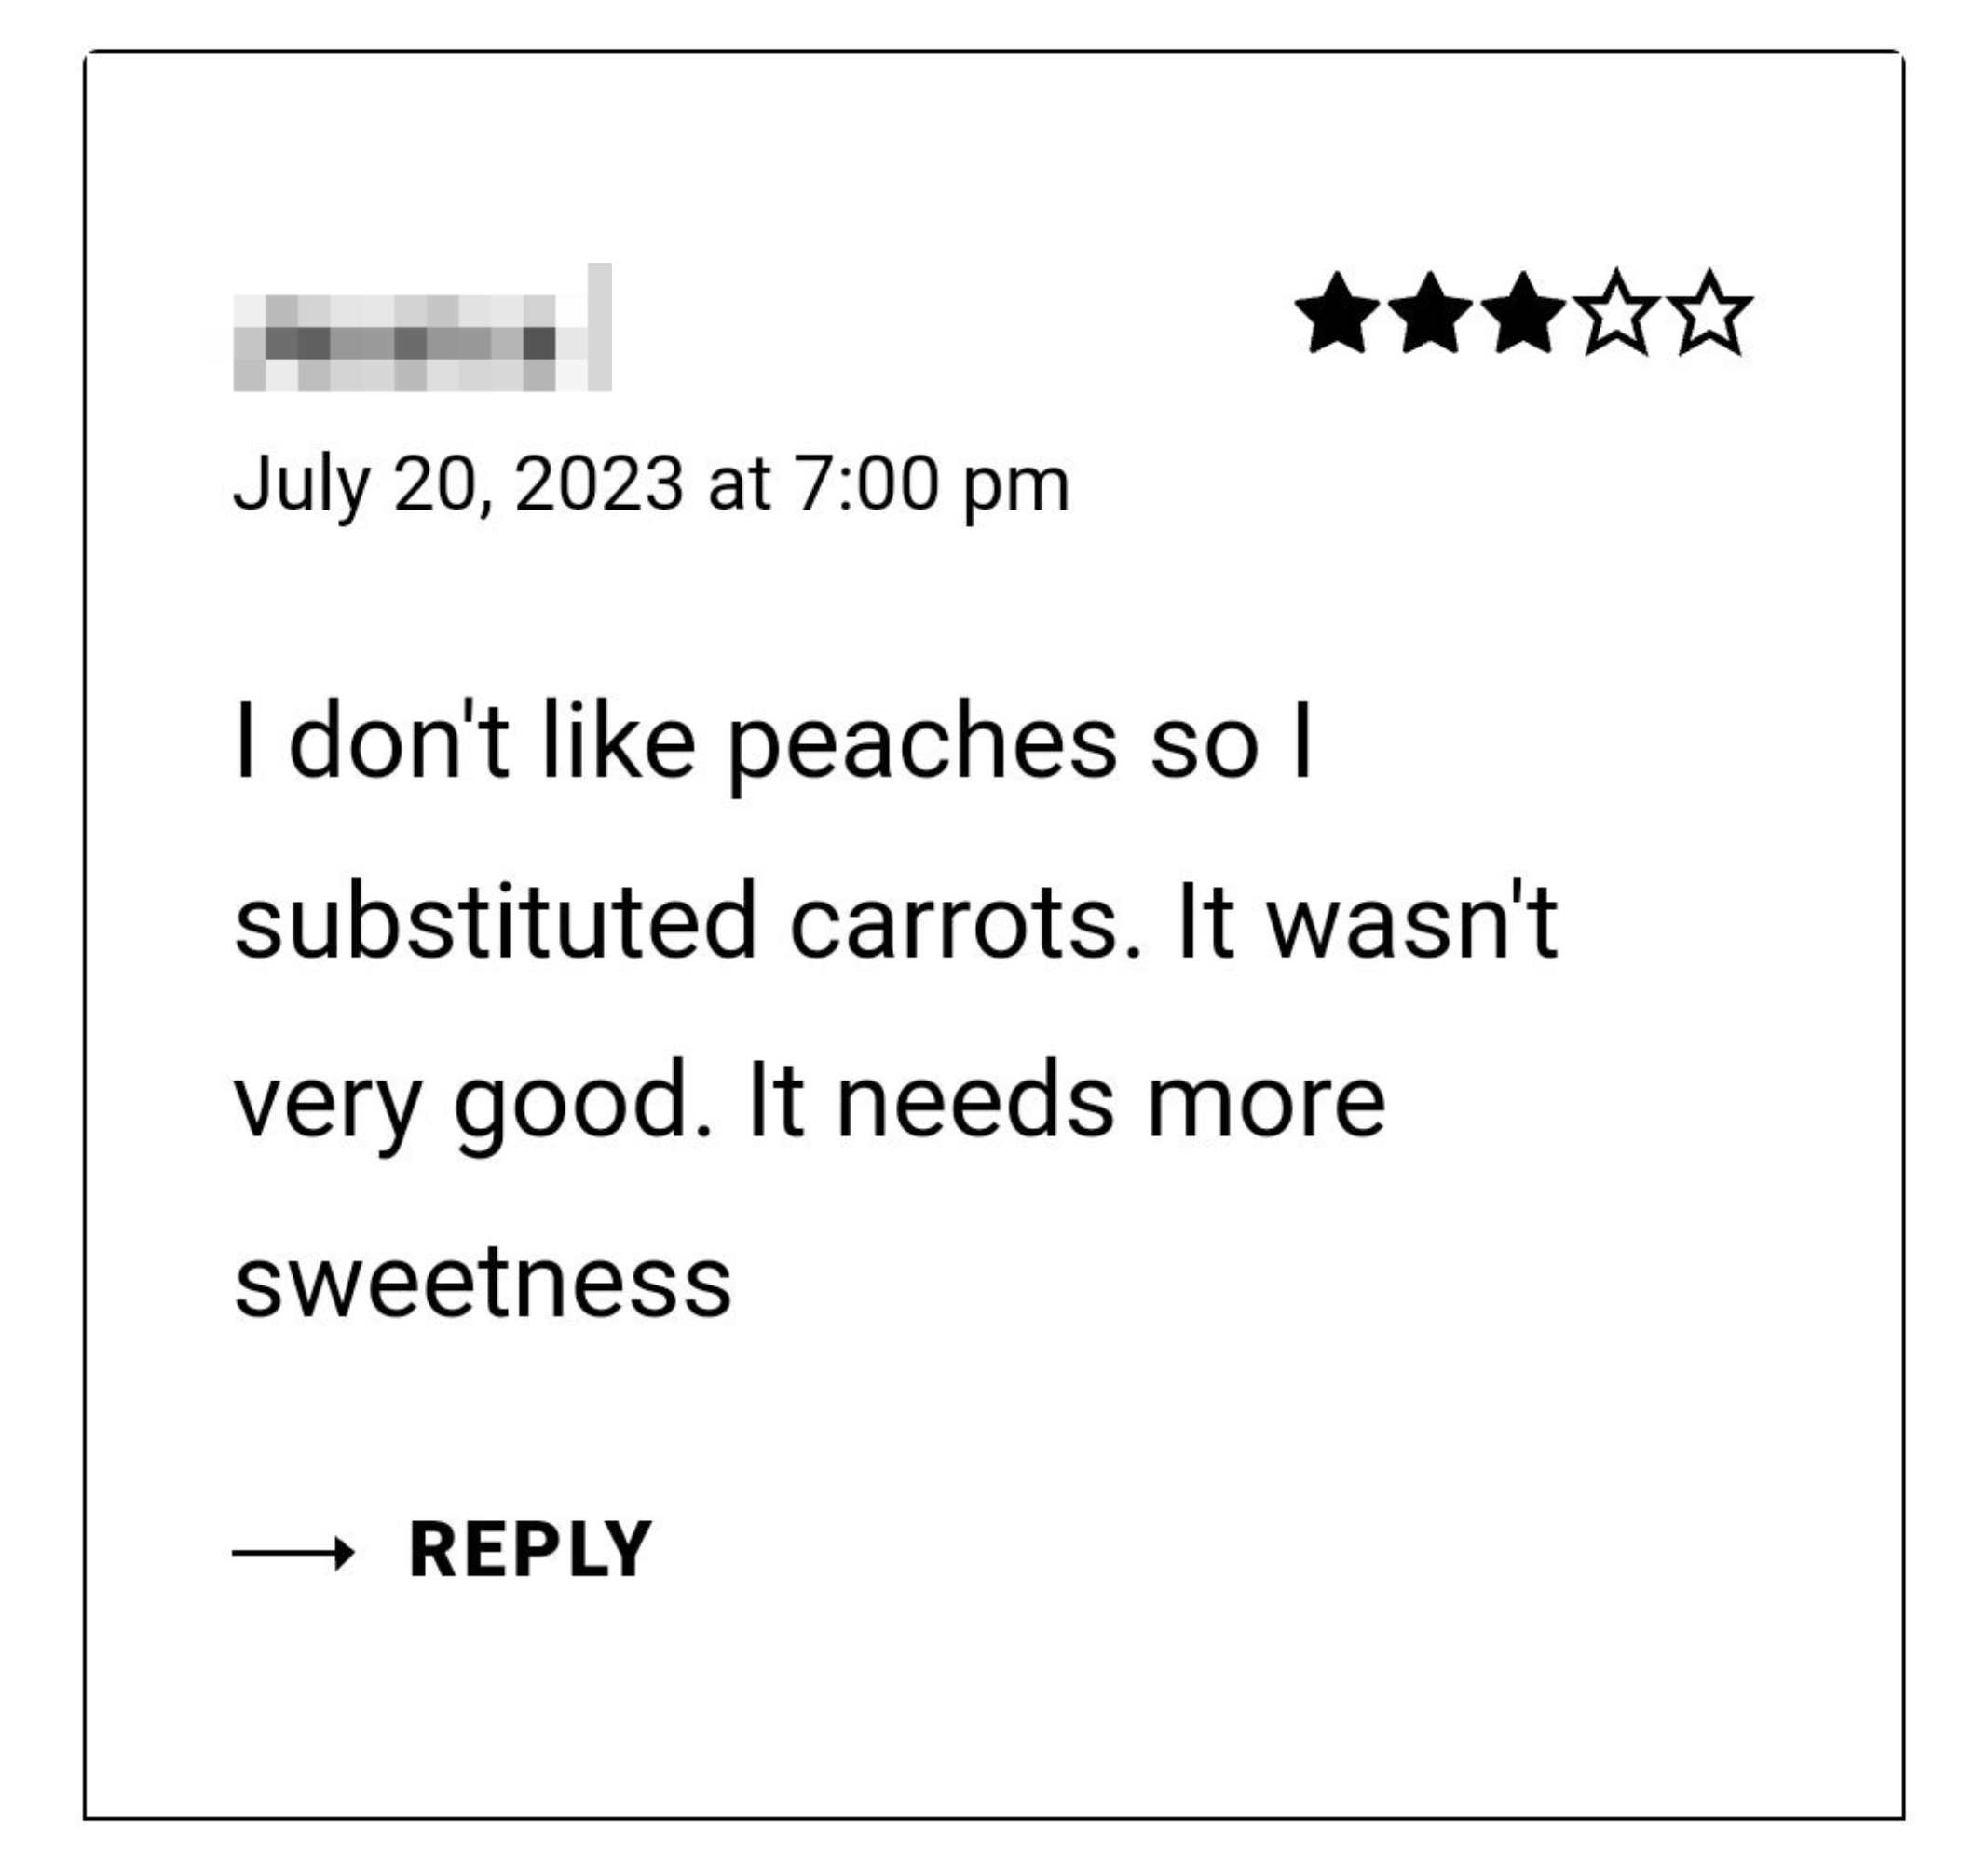 A review from someone saying they don&#x27;t like peaches so they substituted carrots, but it wasn&#x27;t very good — &quot;it needs more sweetness&quot;